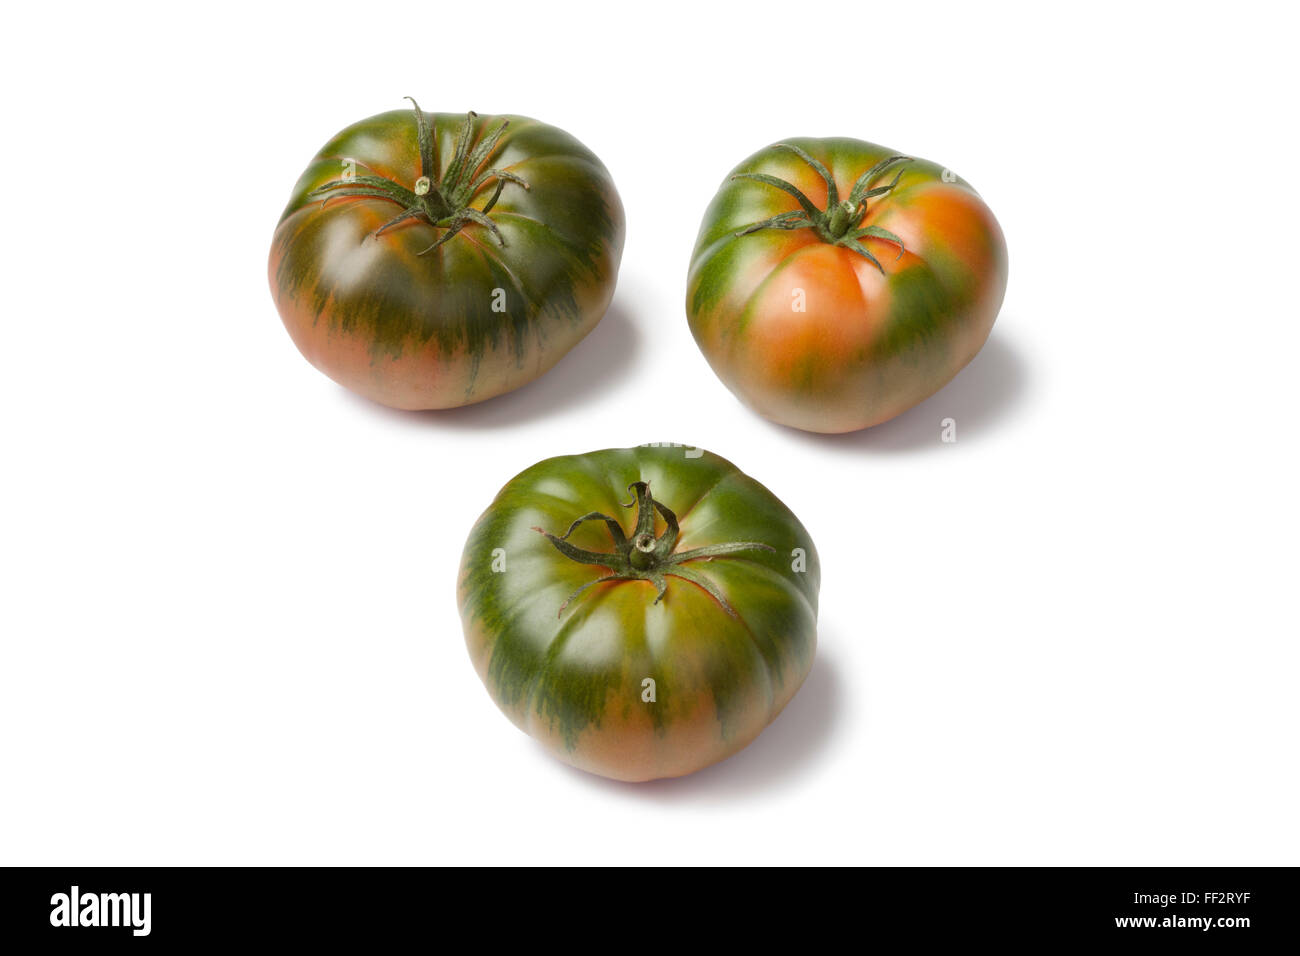 RAF frais heirloom tomatoes on white background Banque D'Images